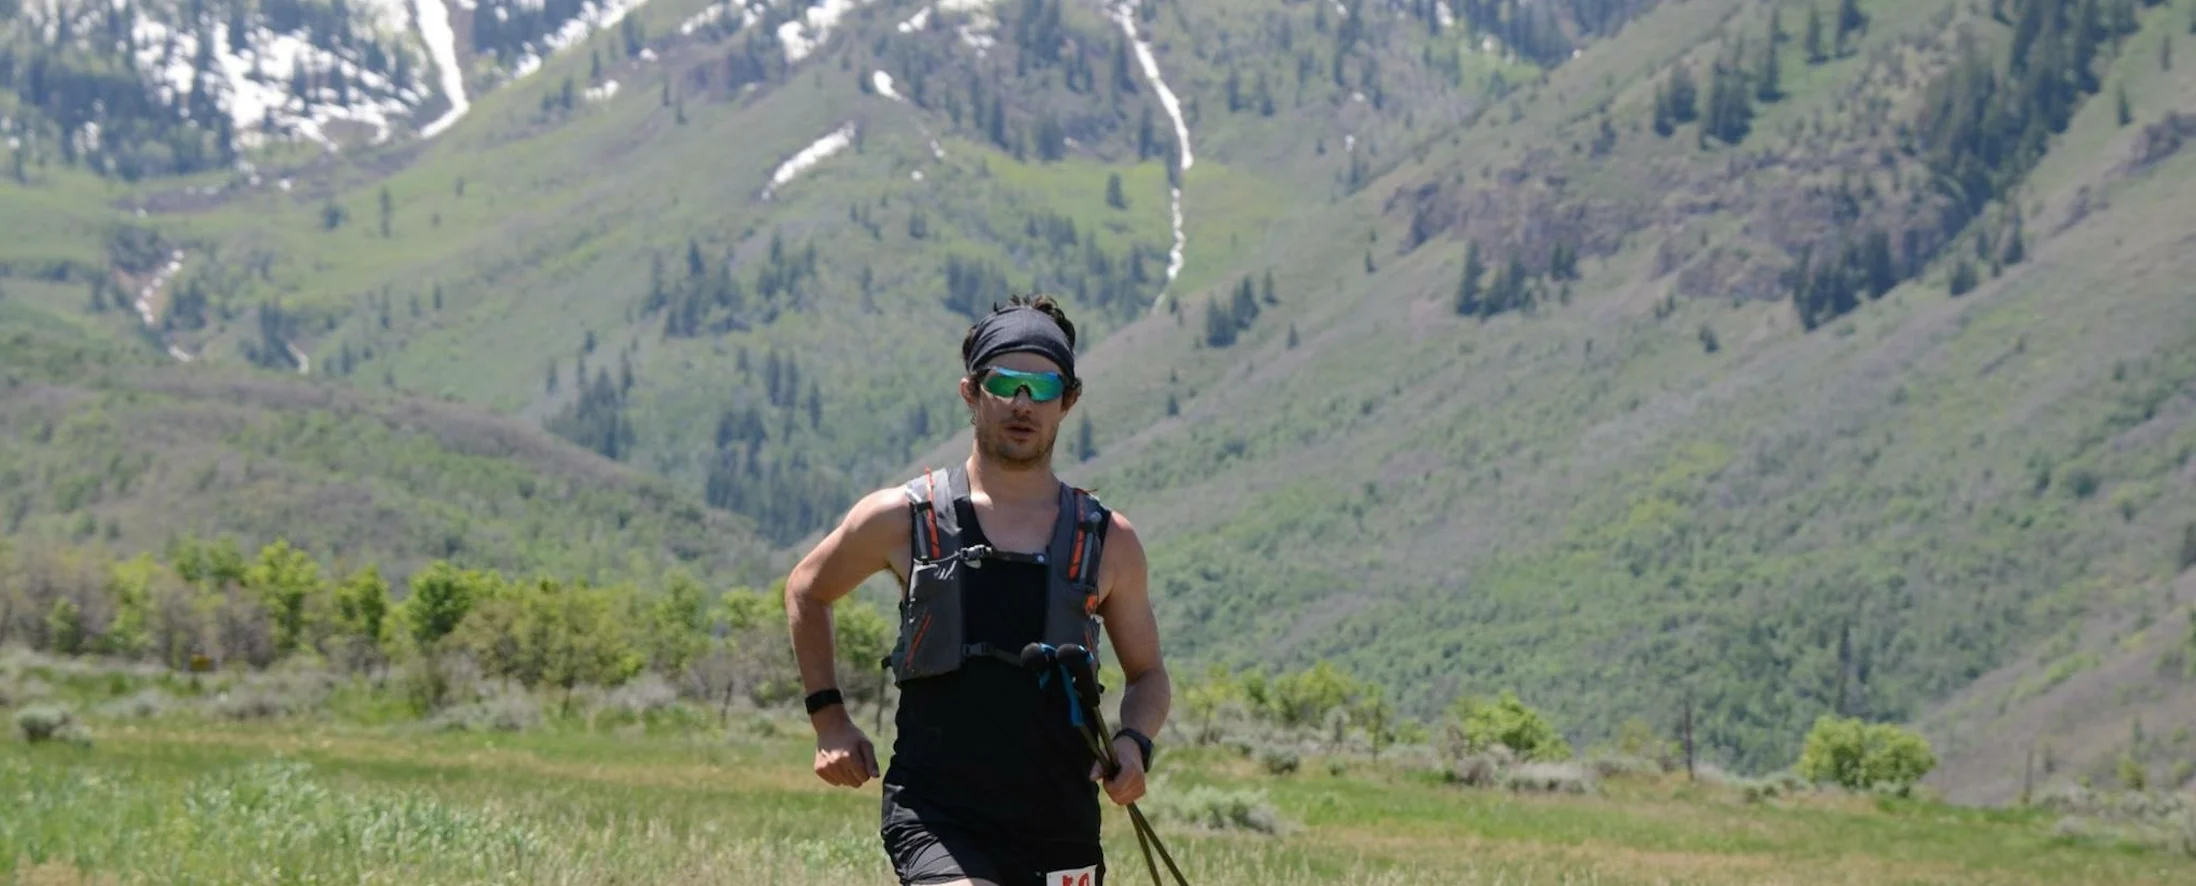 Training for a 100-Mile Race